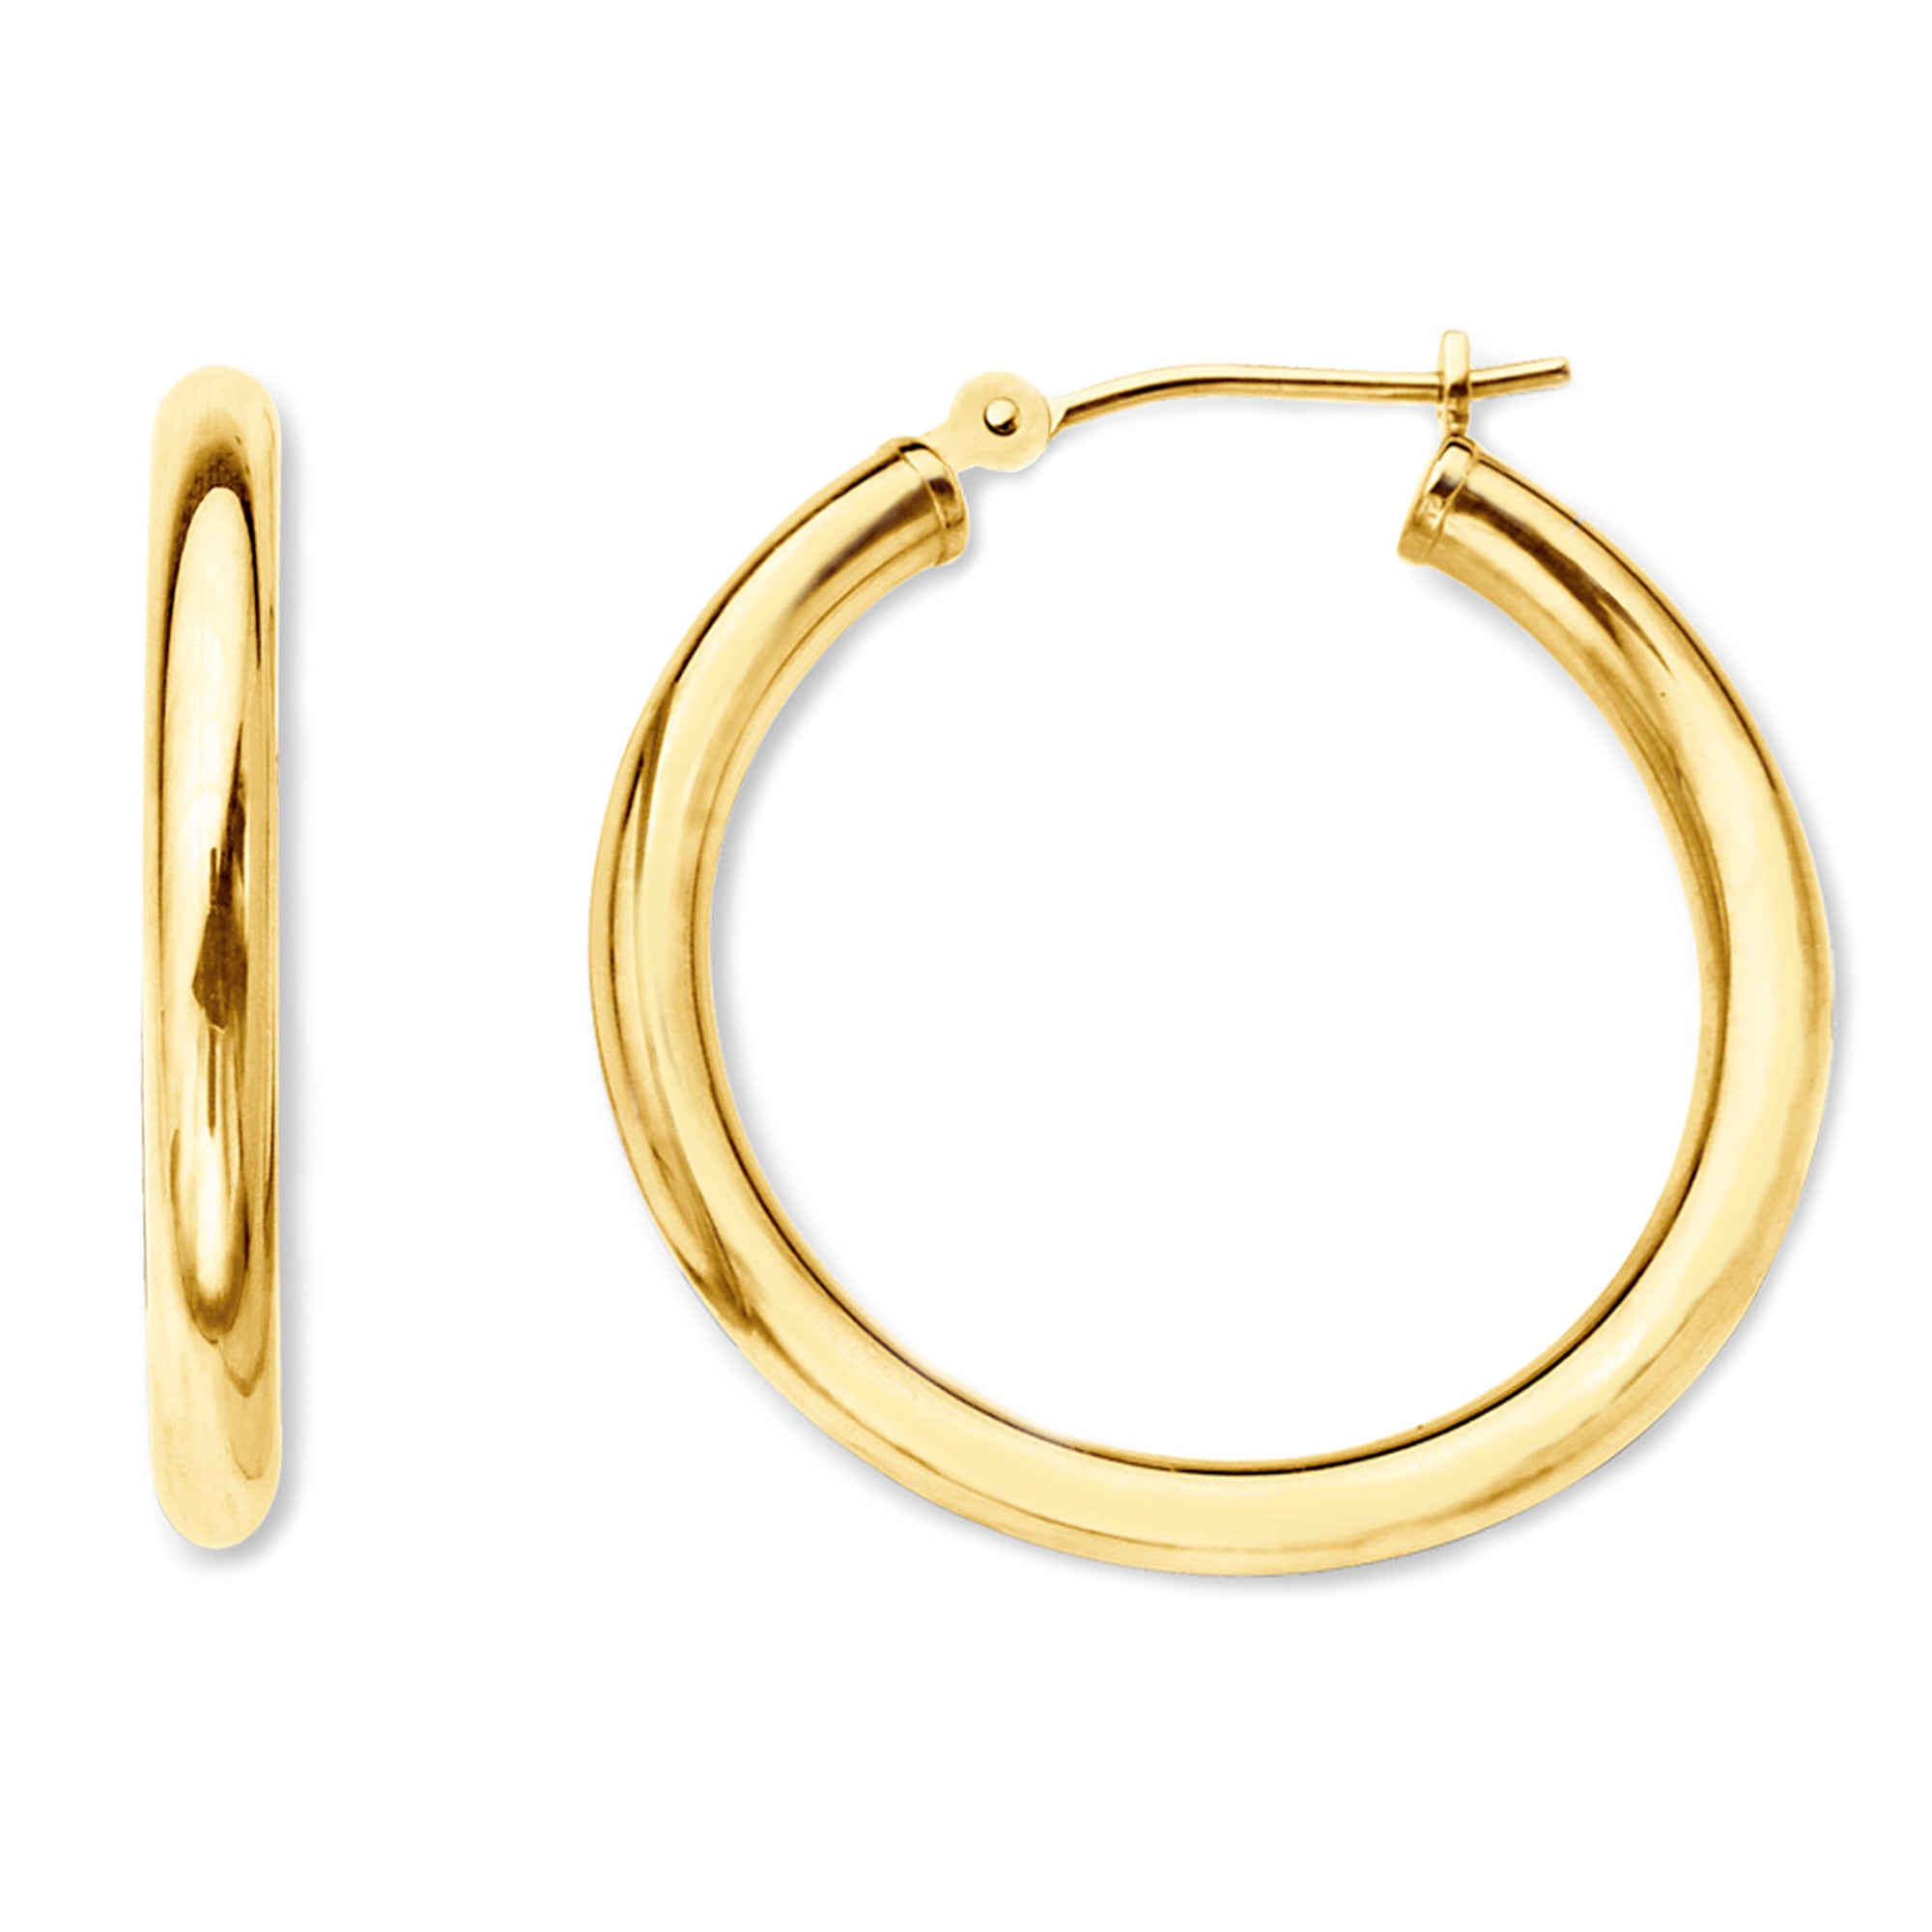 10k Yellow Gold 2mm Shiny Round Tube Hoop Earrings fine designer jewelry for men and women